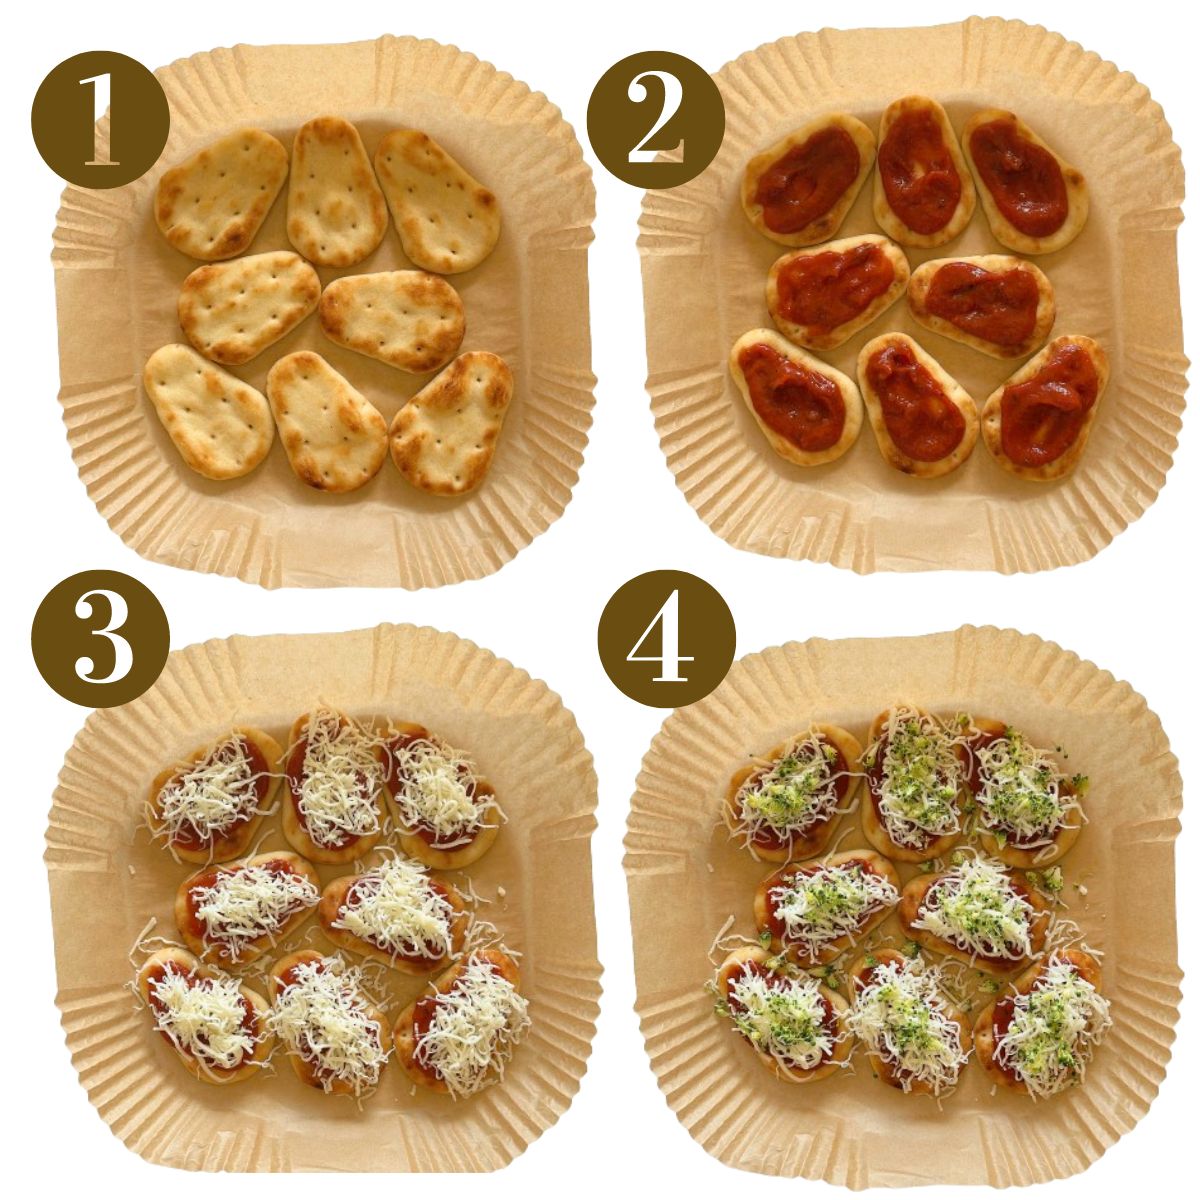 Steps to make air fryer naan pizza.